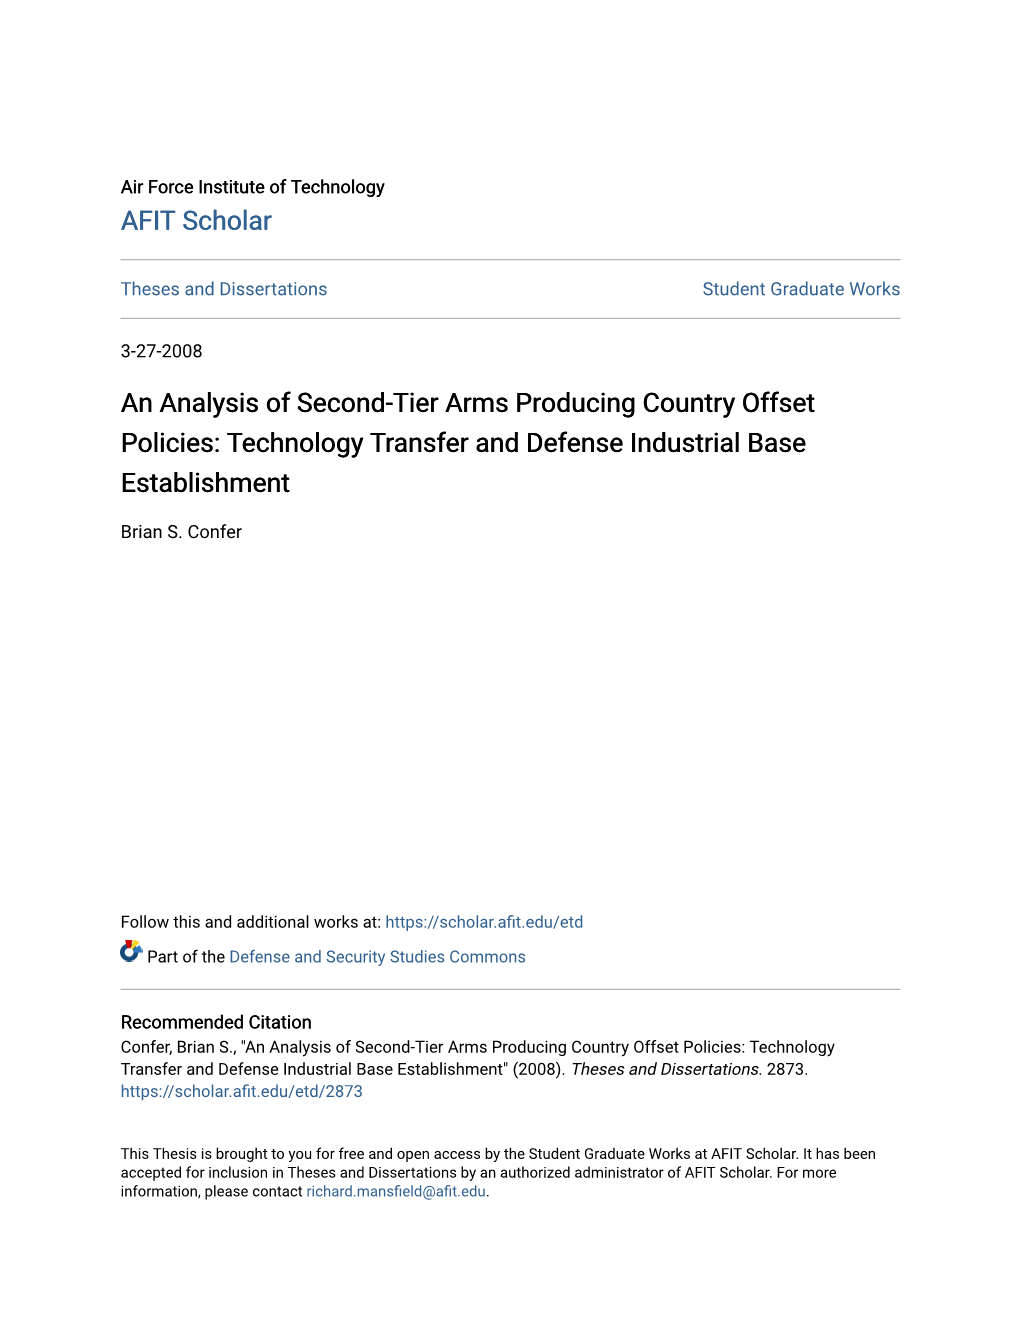 An Analysis of Second-Tier Arms Producing Country Offset Policies: Technology Transfer and Defense Industrial Base Establishment